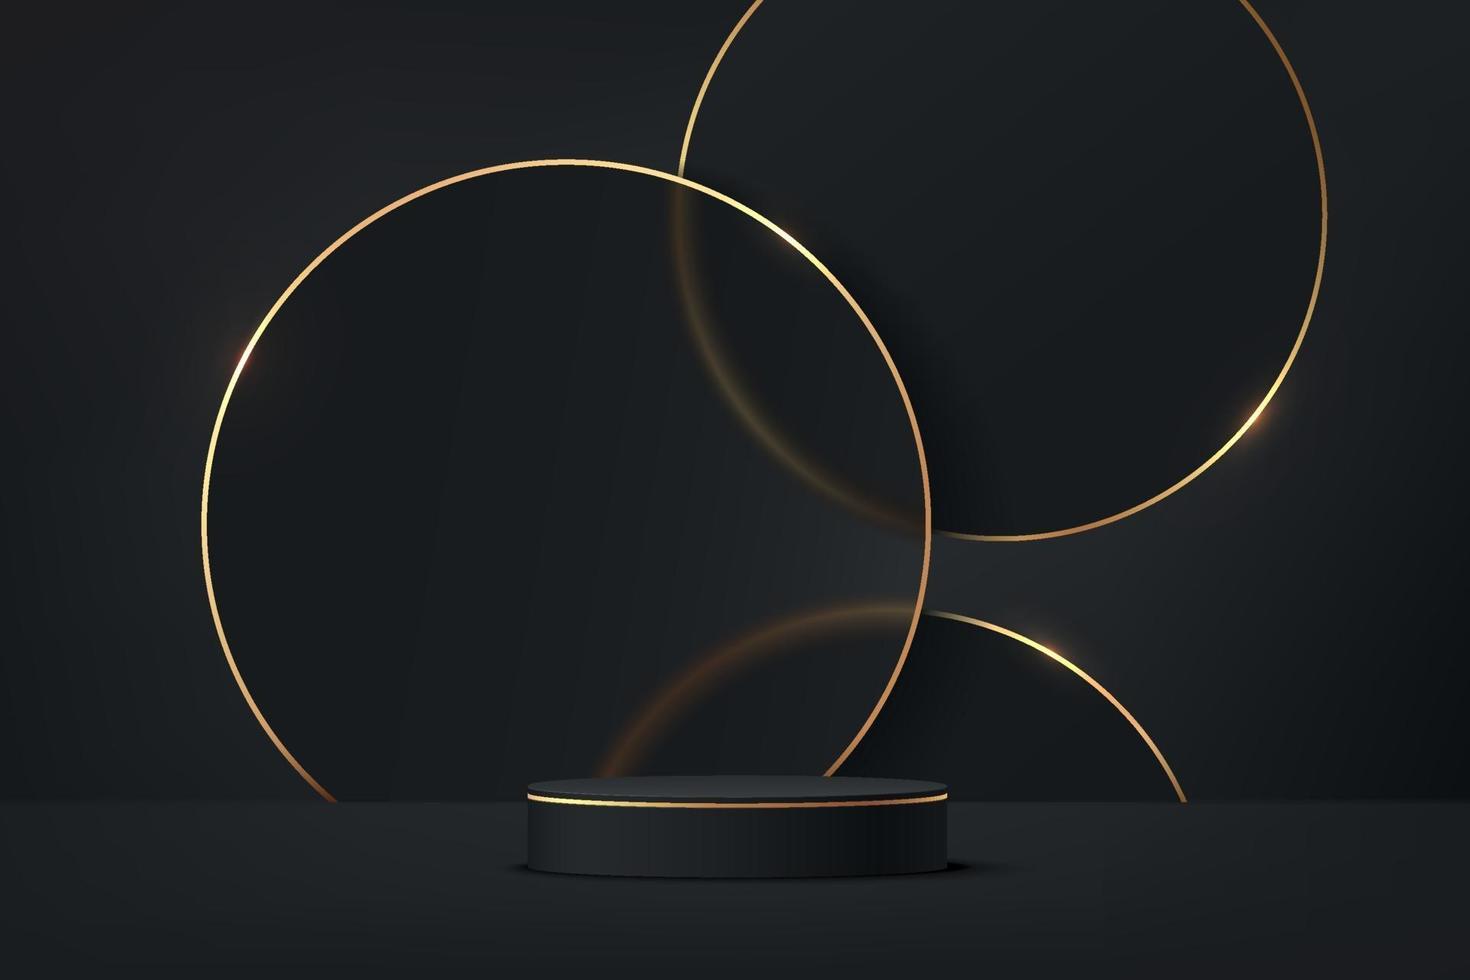 Abstract 3D black cylinder pedestal podium and glass circle backdrop vector